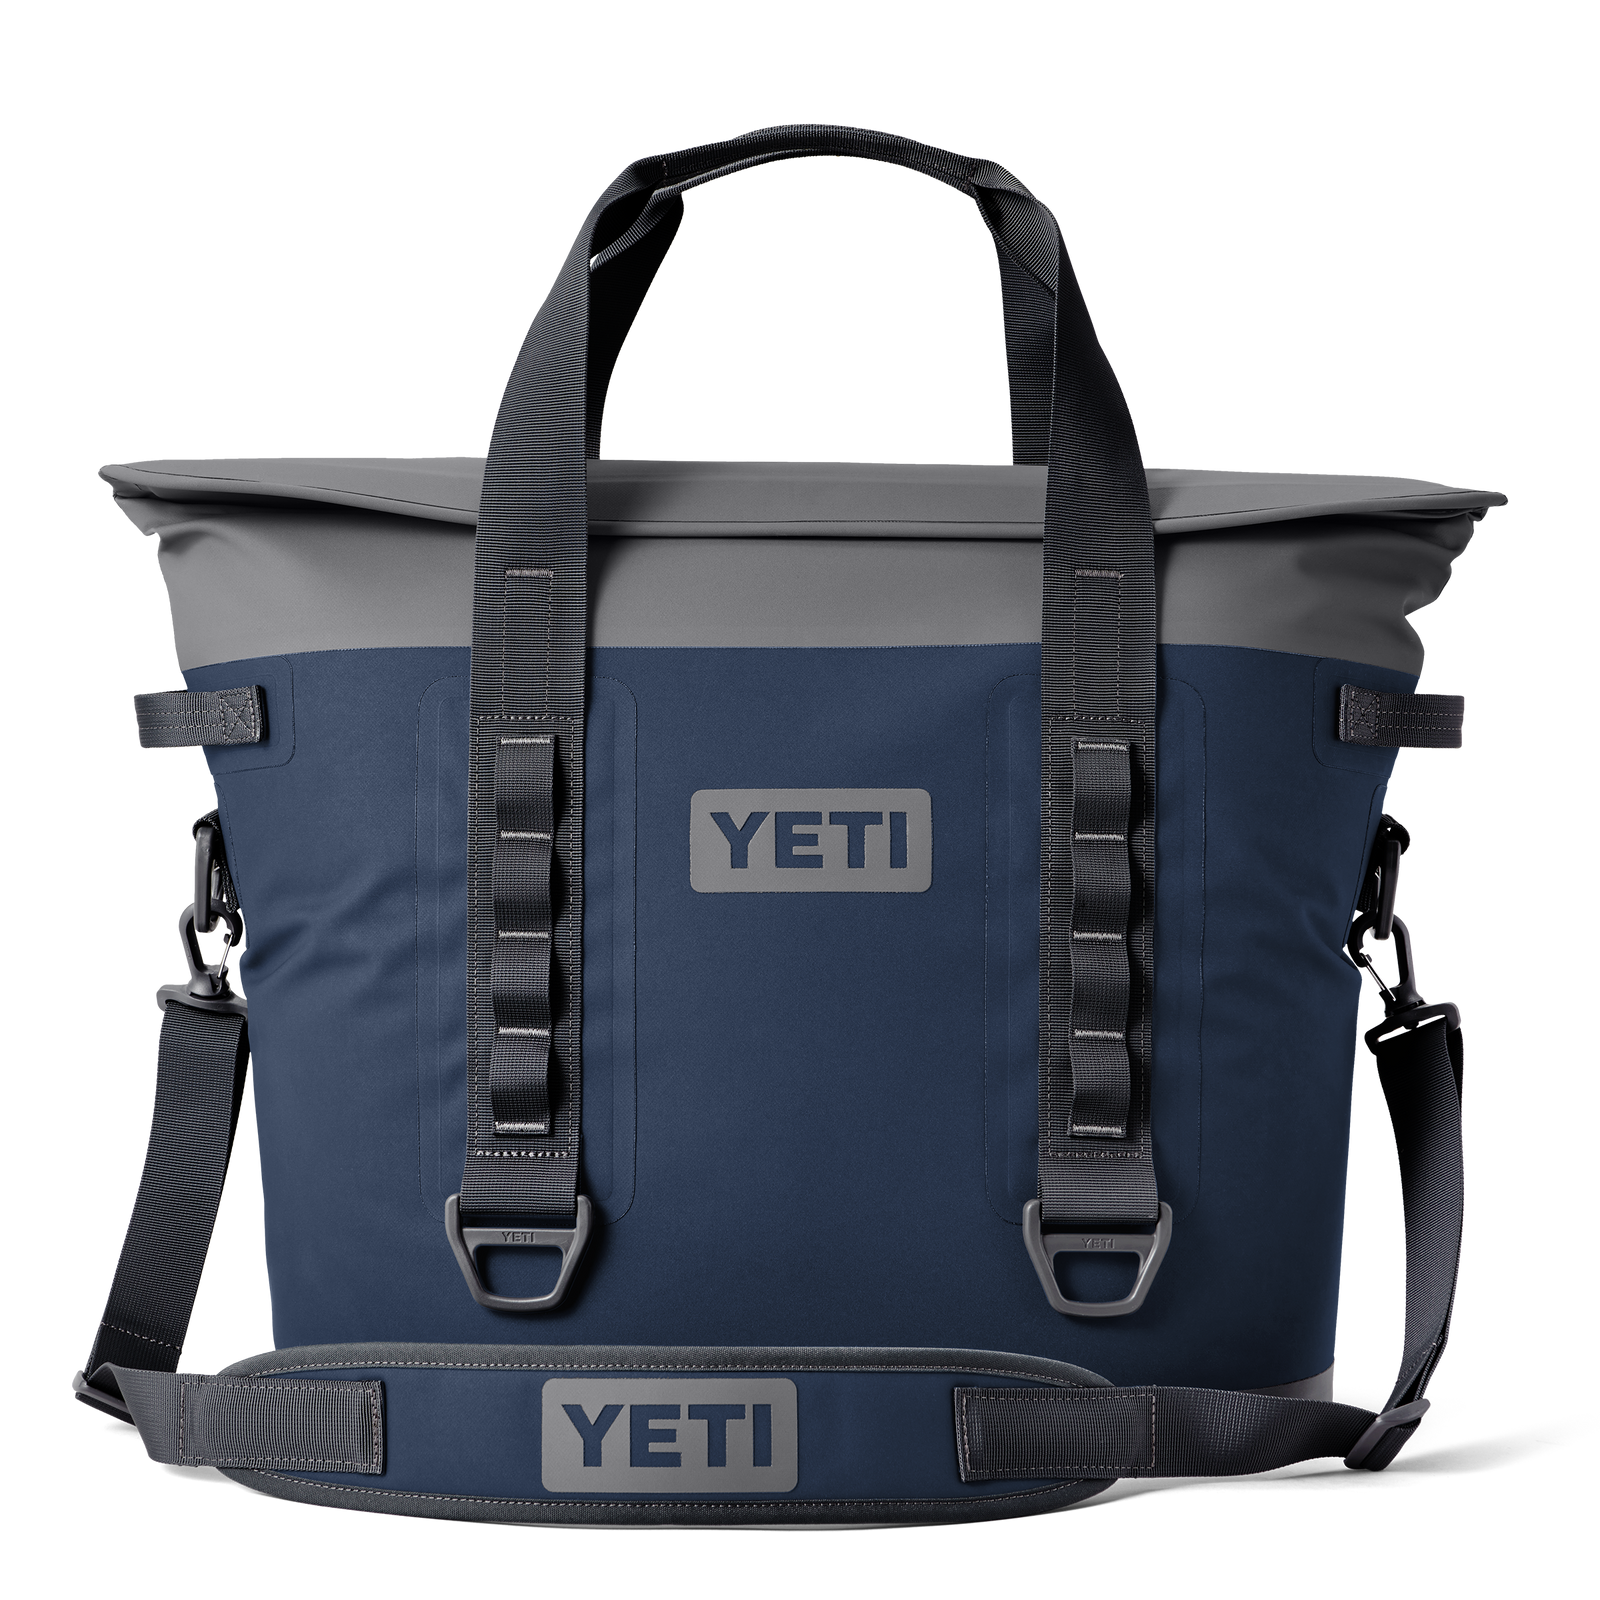 YETI Releases New Colors, Camino Carryalls and Updated Hopper M30